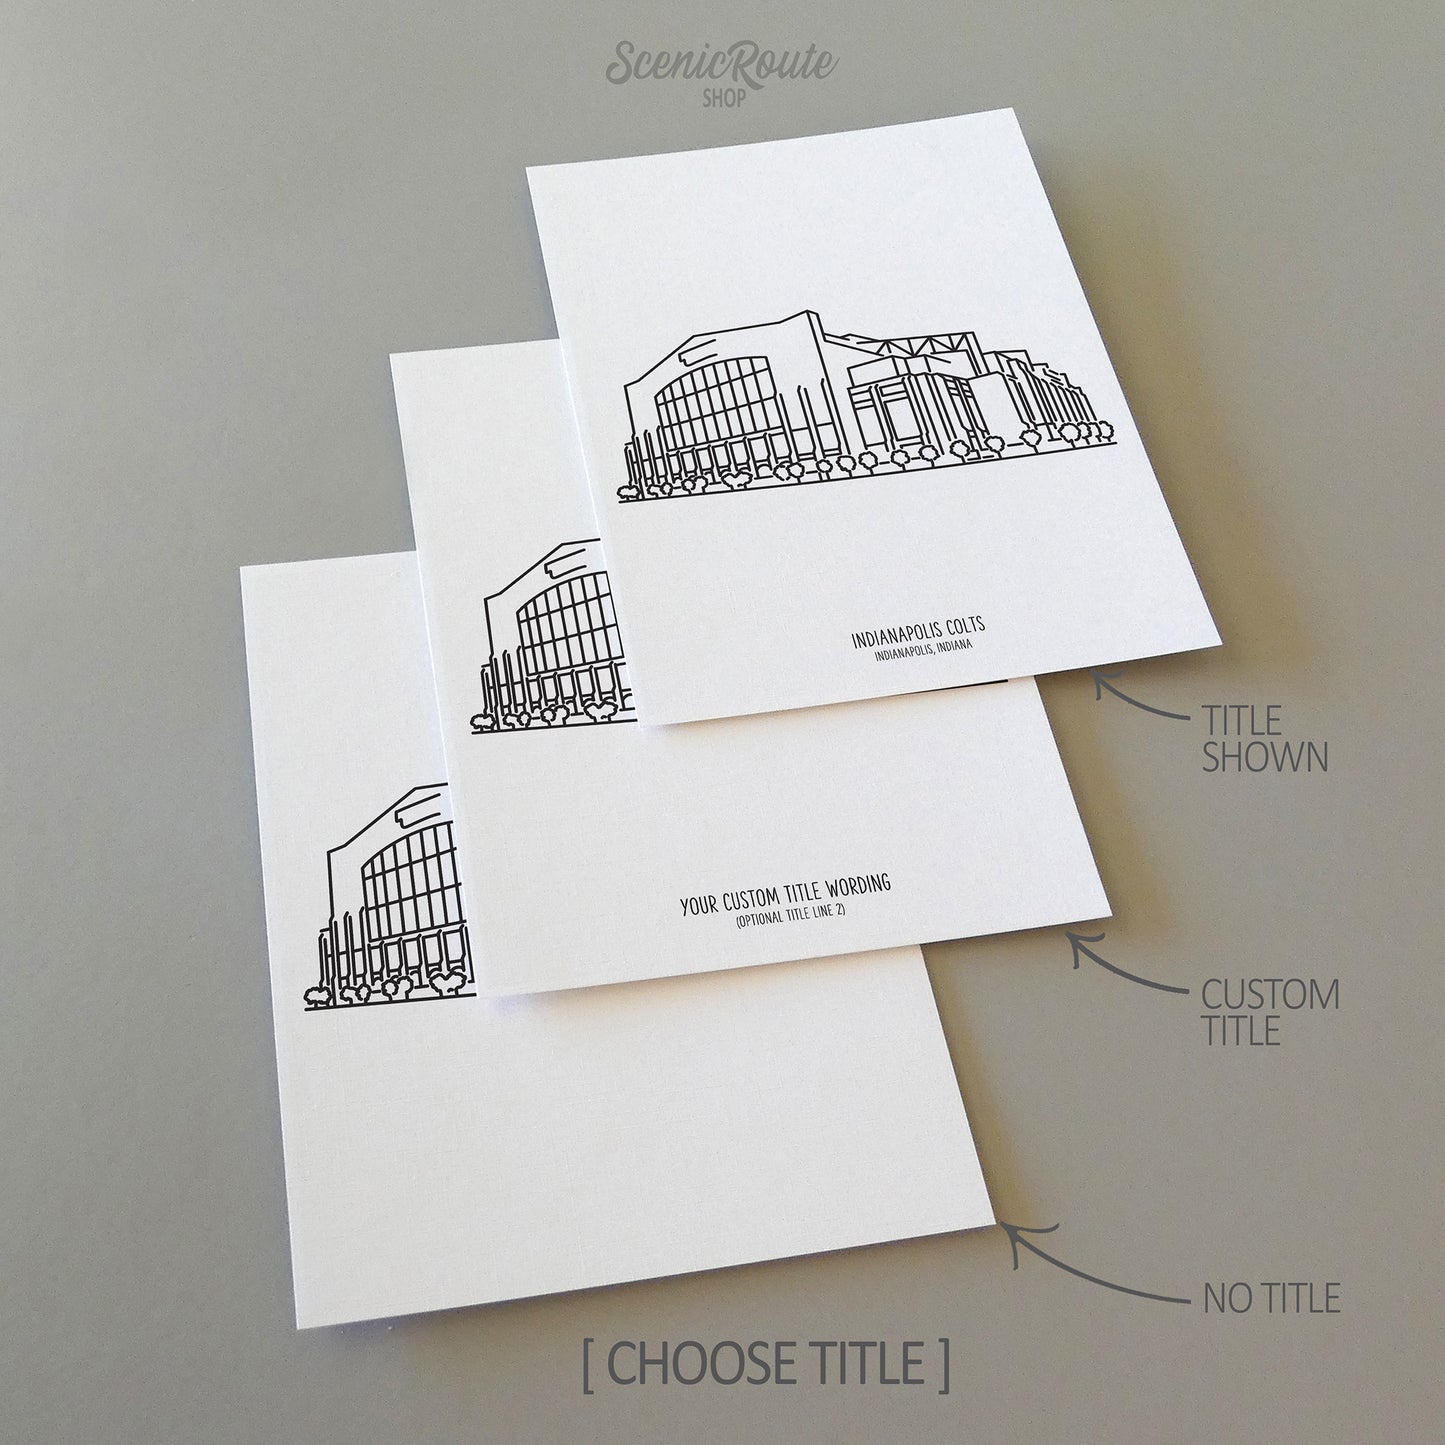 Three line art drawings of the Indianapolis Colts Stadium on white linen paper with a gray background.  The pieces are shown with title options that can be chosen and personalized.